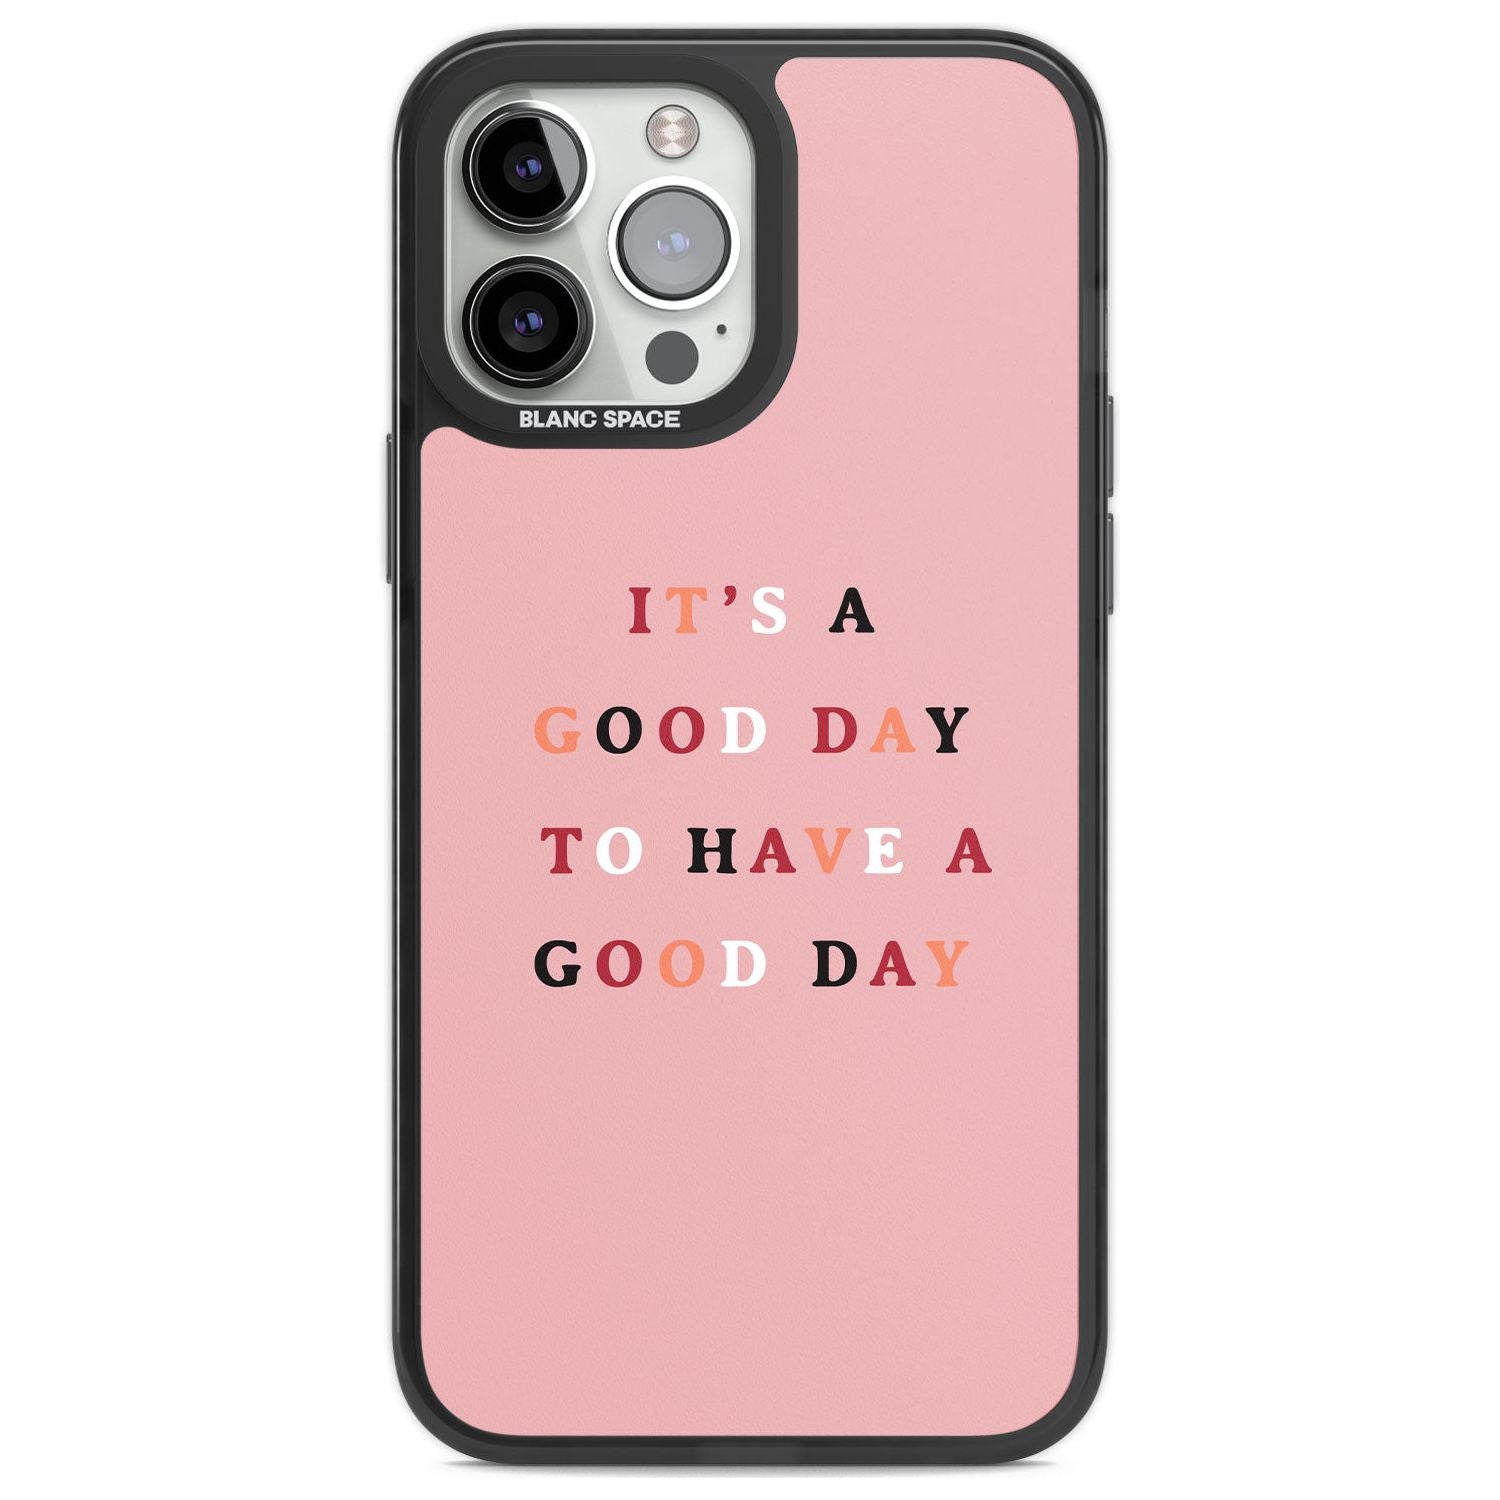 It's a good day to have a good day Phone Case iPhone 13 Pro Max / Black Impact Case,iPhone 14 Pro Max / Black Impact Case Blanc Space